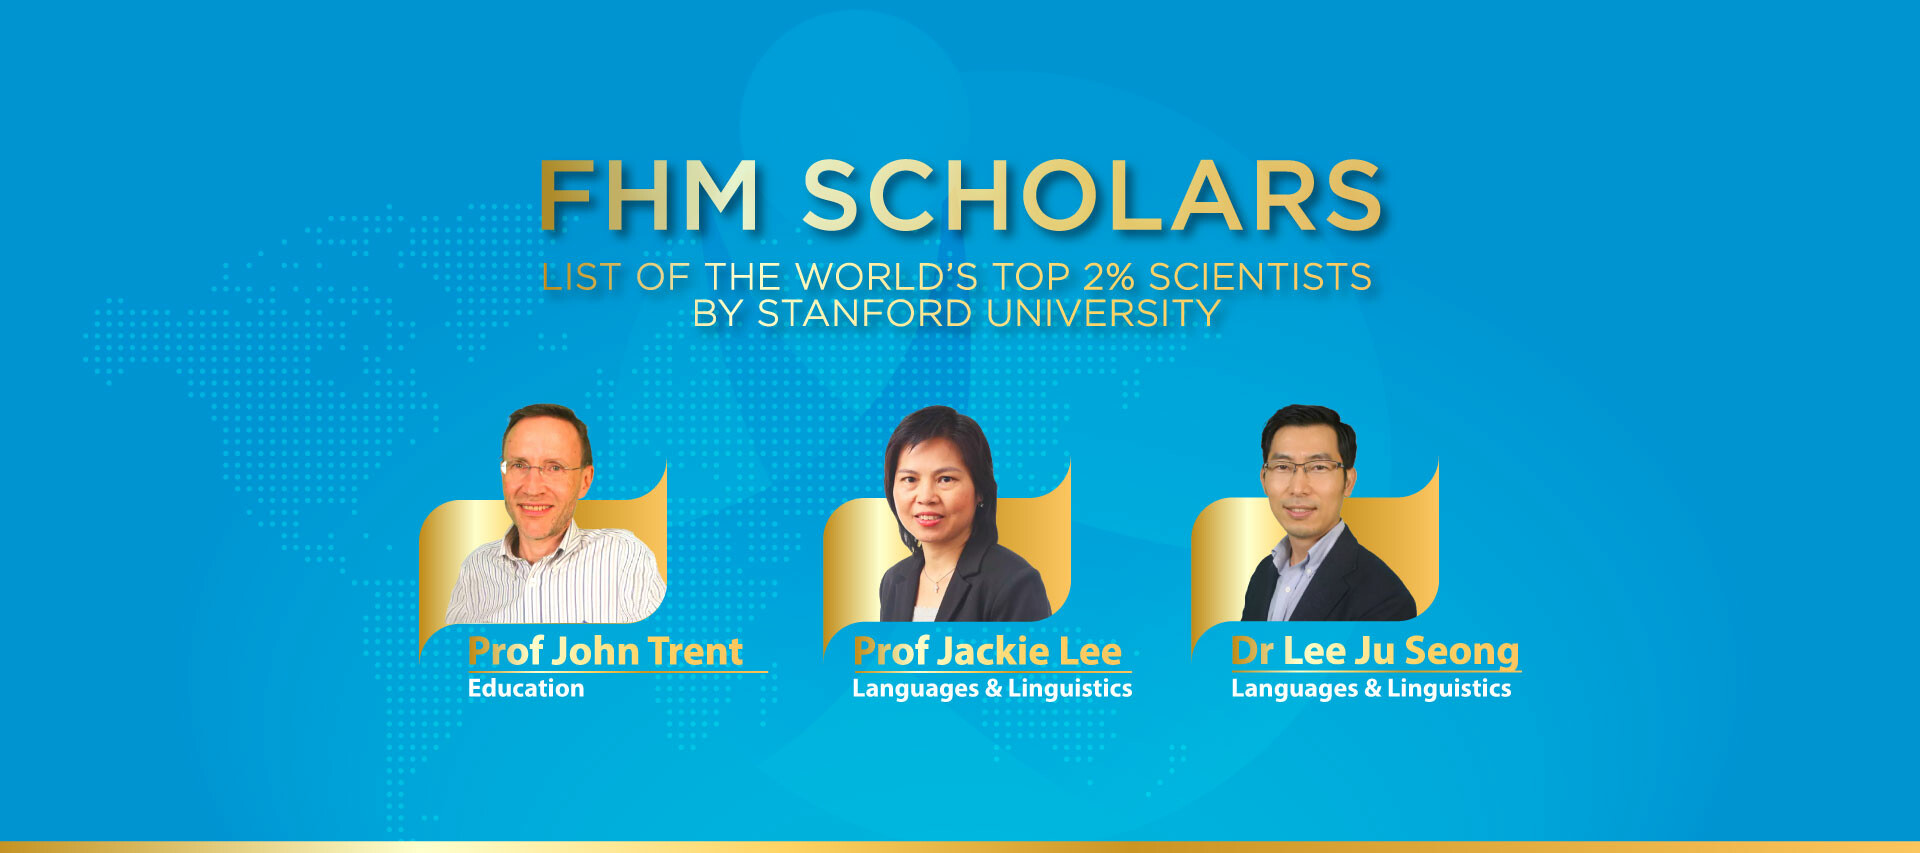 Three FHM Scholars Ranked the World’s Top 2% Scientists by Stanford University